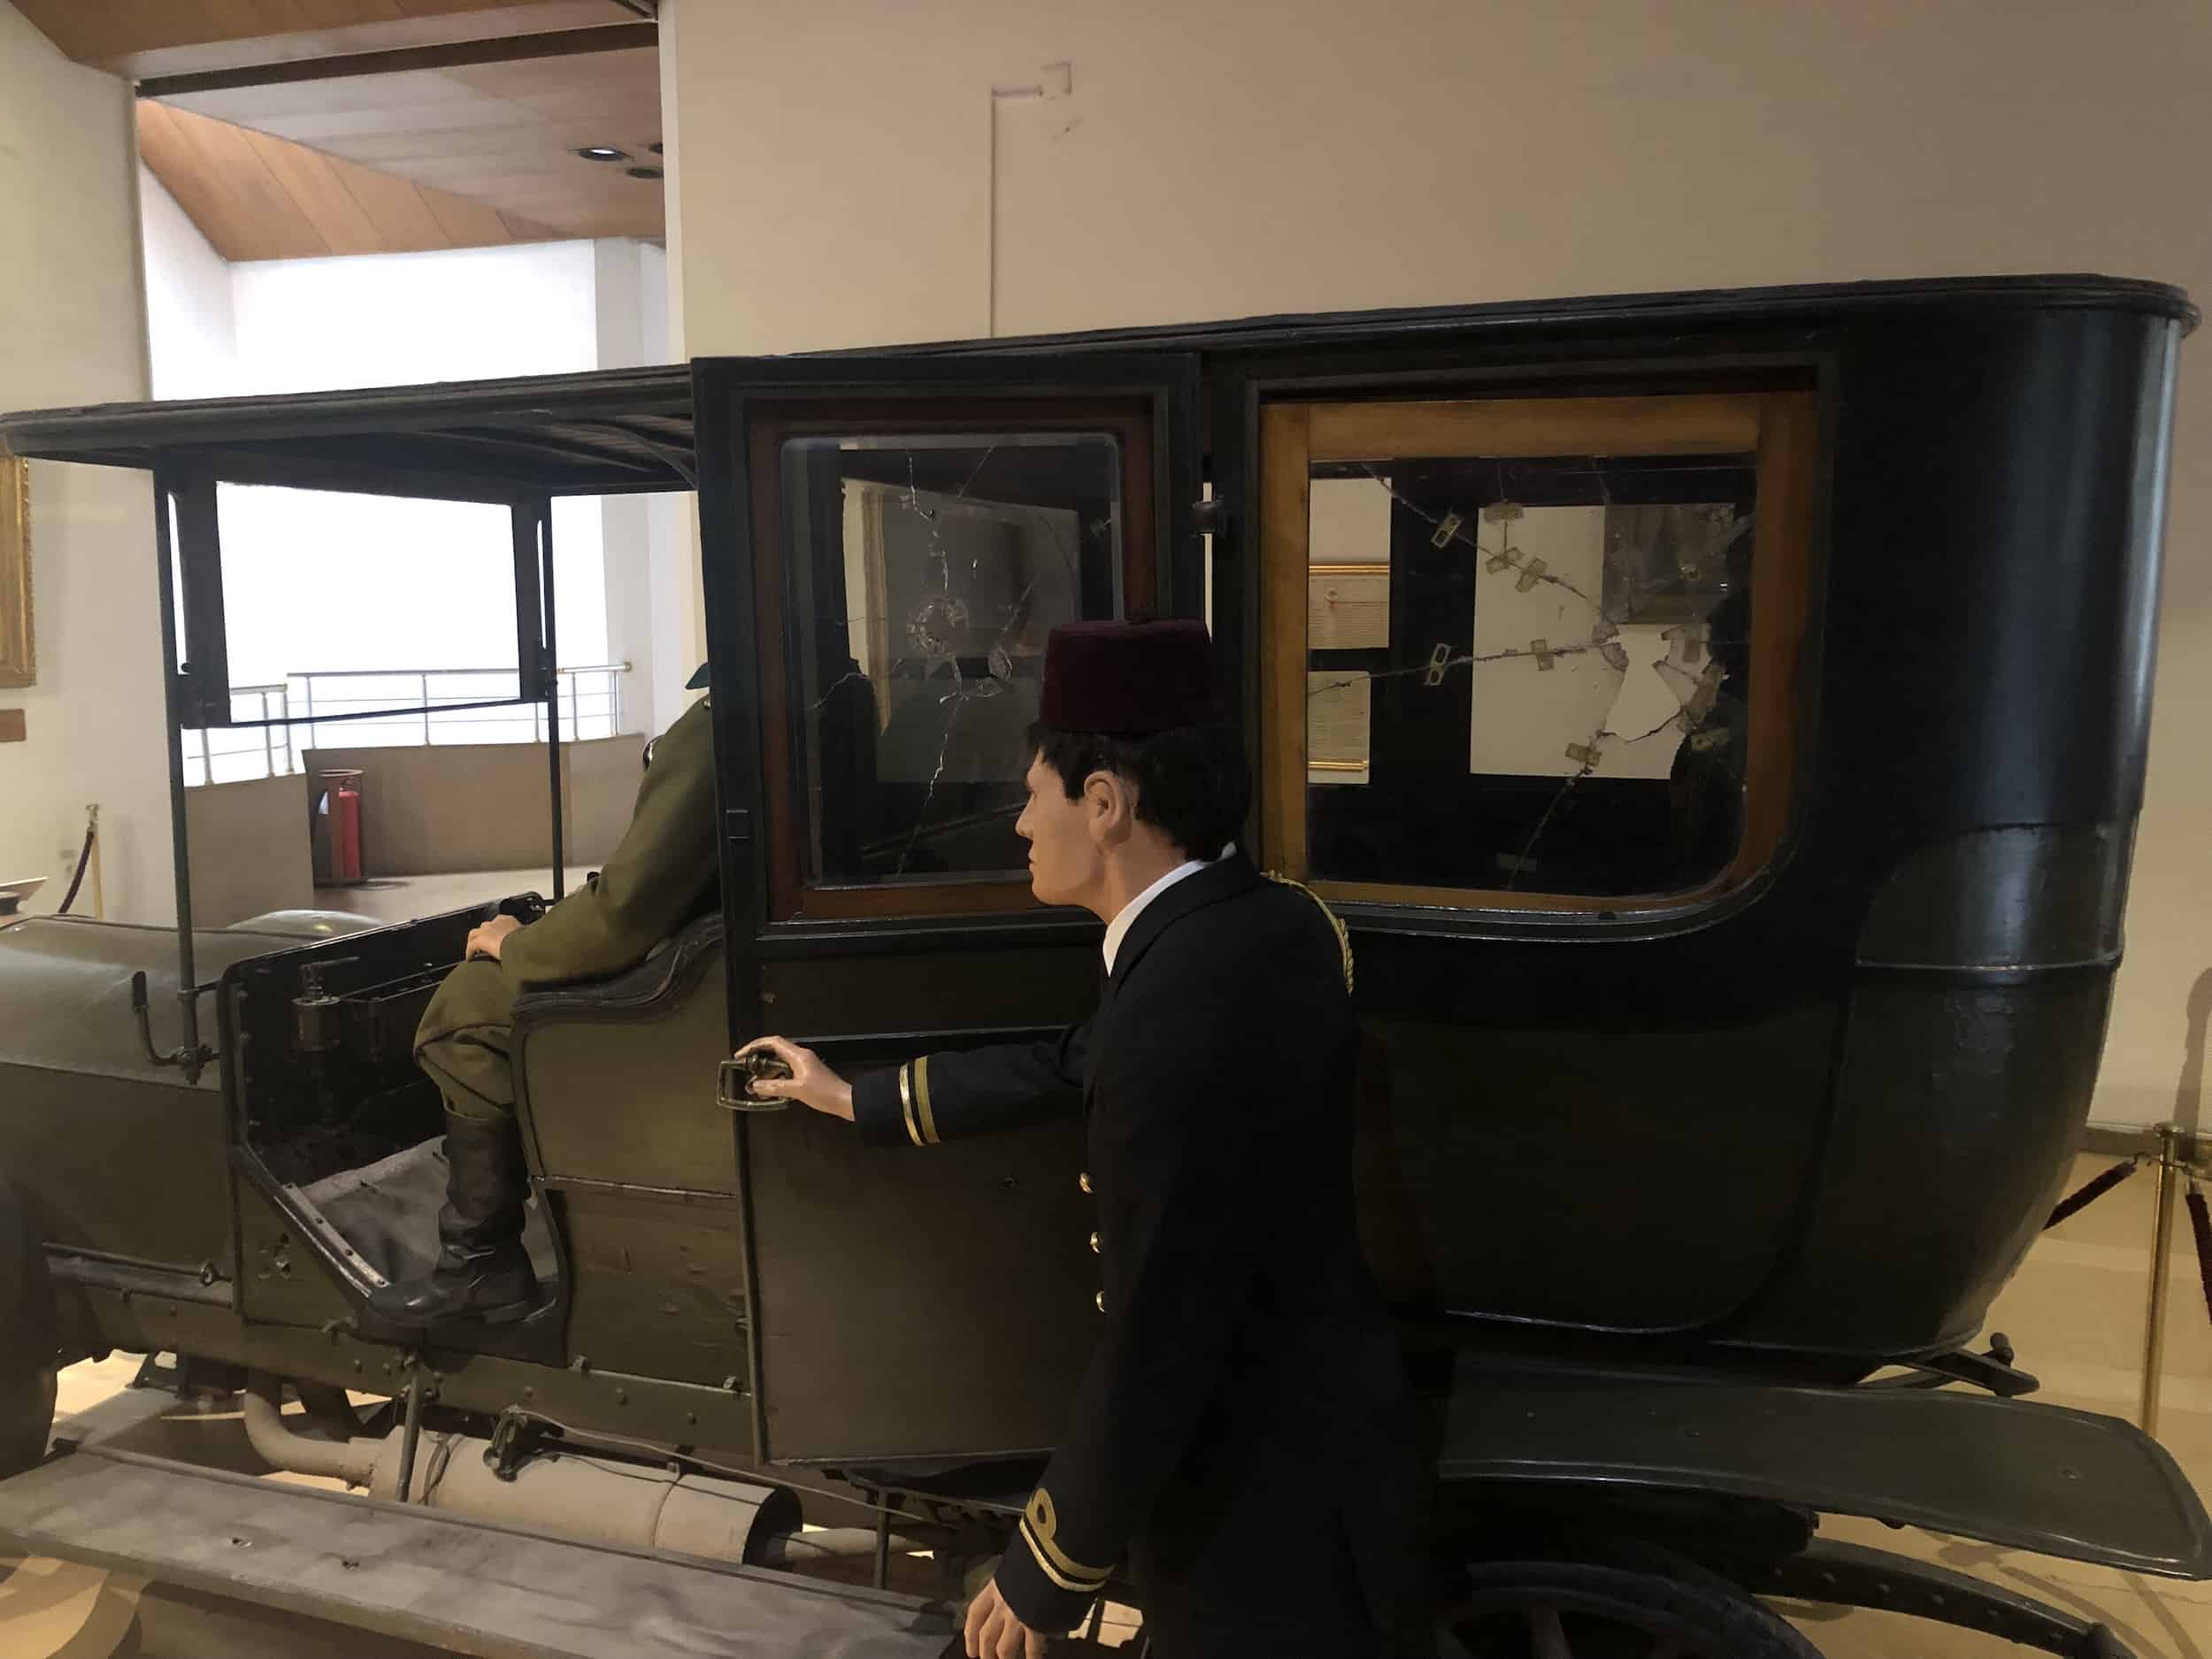 Car in which Mahmud Şevket Pasha was assassinated in the Mahmud Şevket Pasha Hall at the Harbiye Military Museum in Istanbul, Turkey